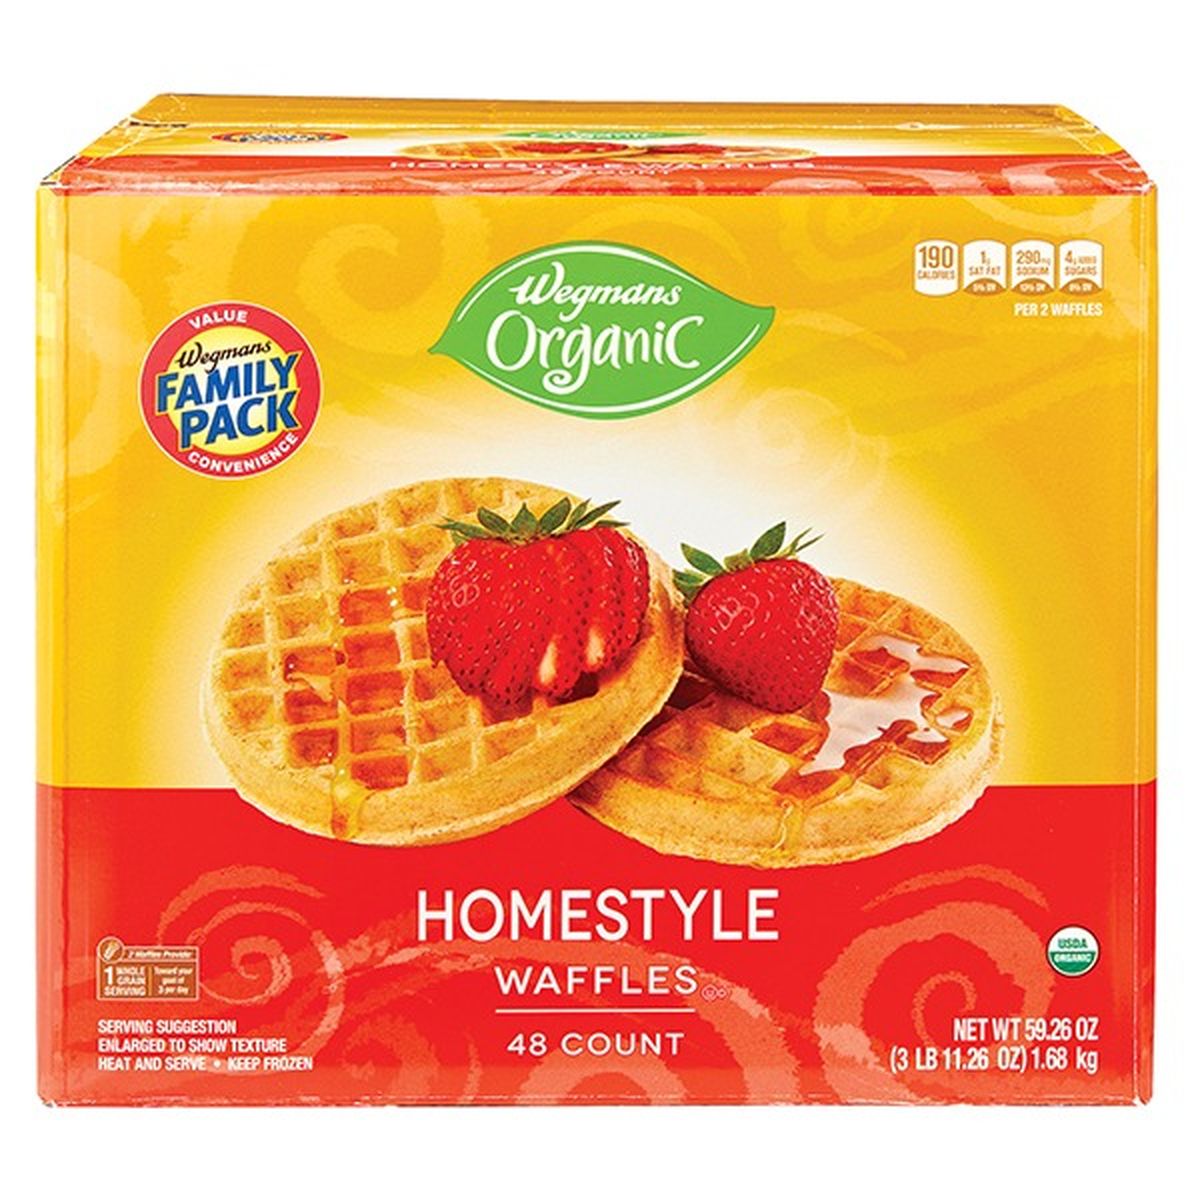 Calories in Wegmans Organic Waffles, Homestyle, FAMILY PACK